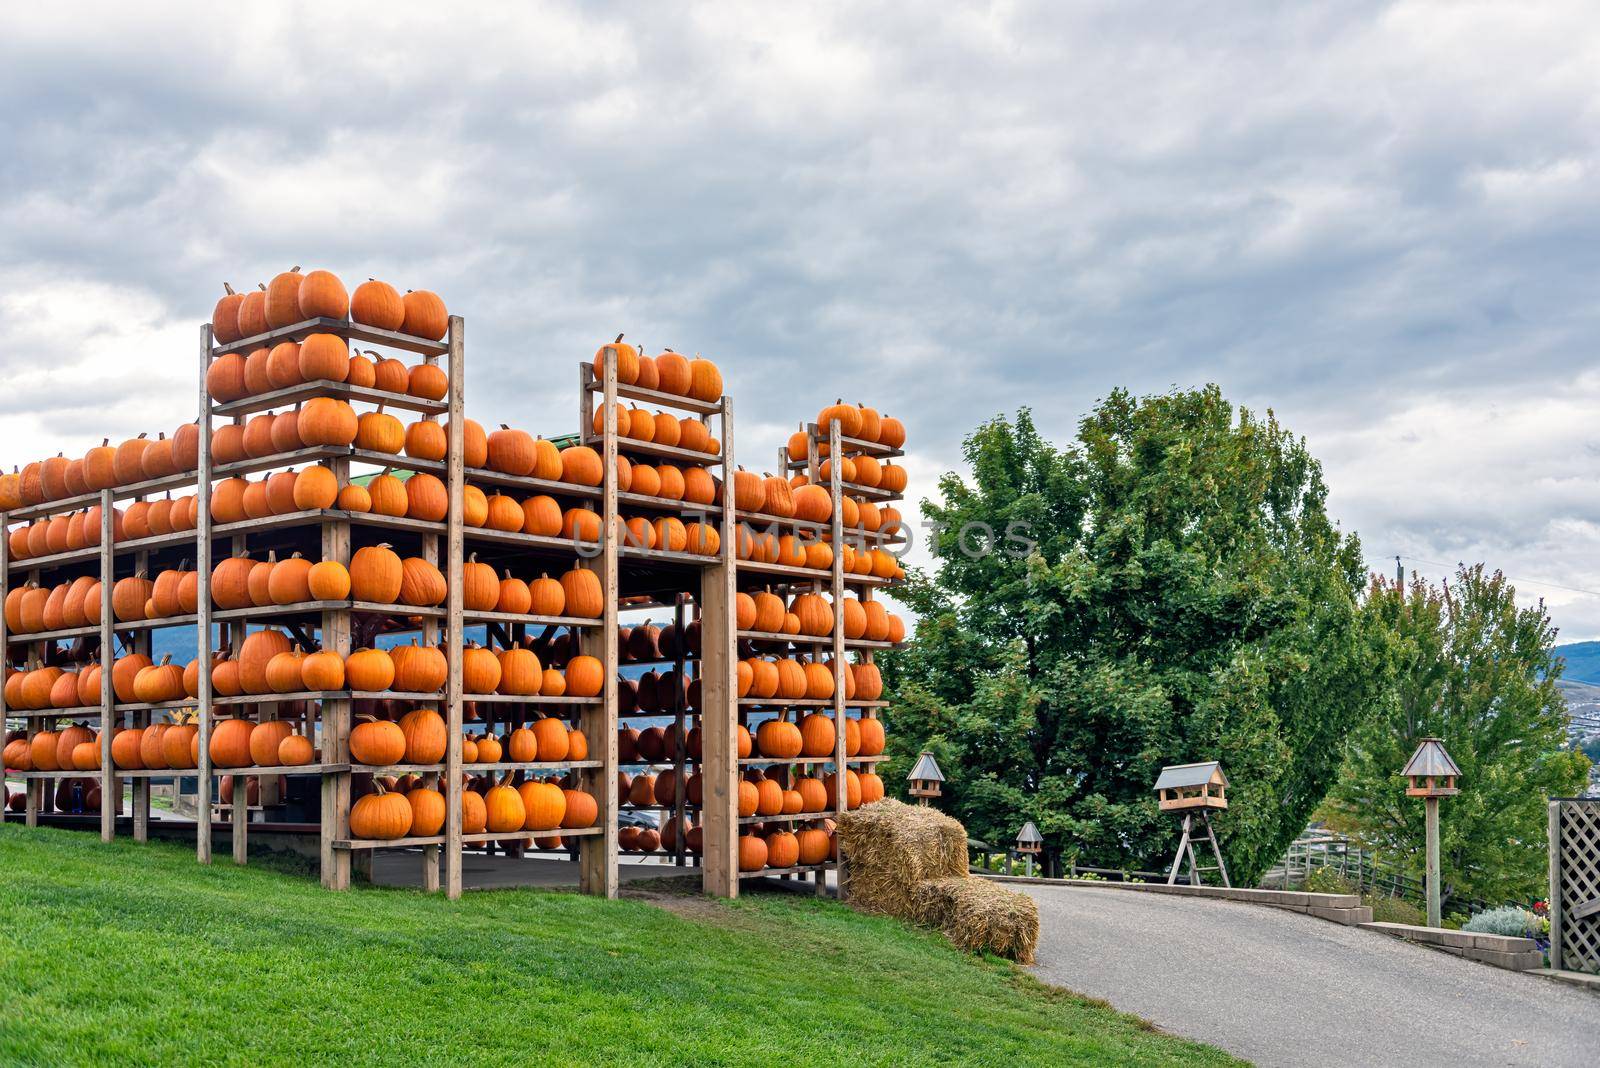 Pumpkin harvest on the stack. Decorative Heloween fortress on the hill.